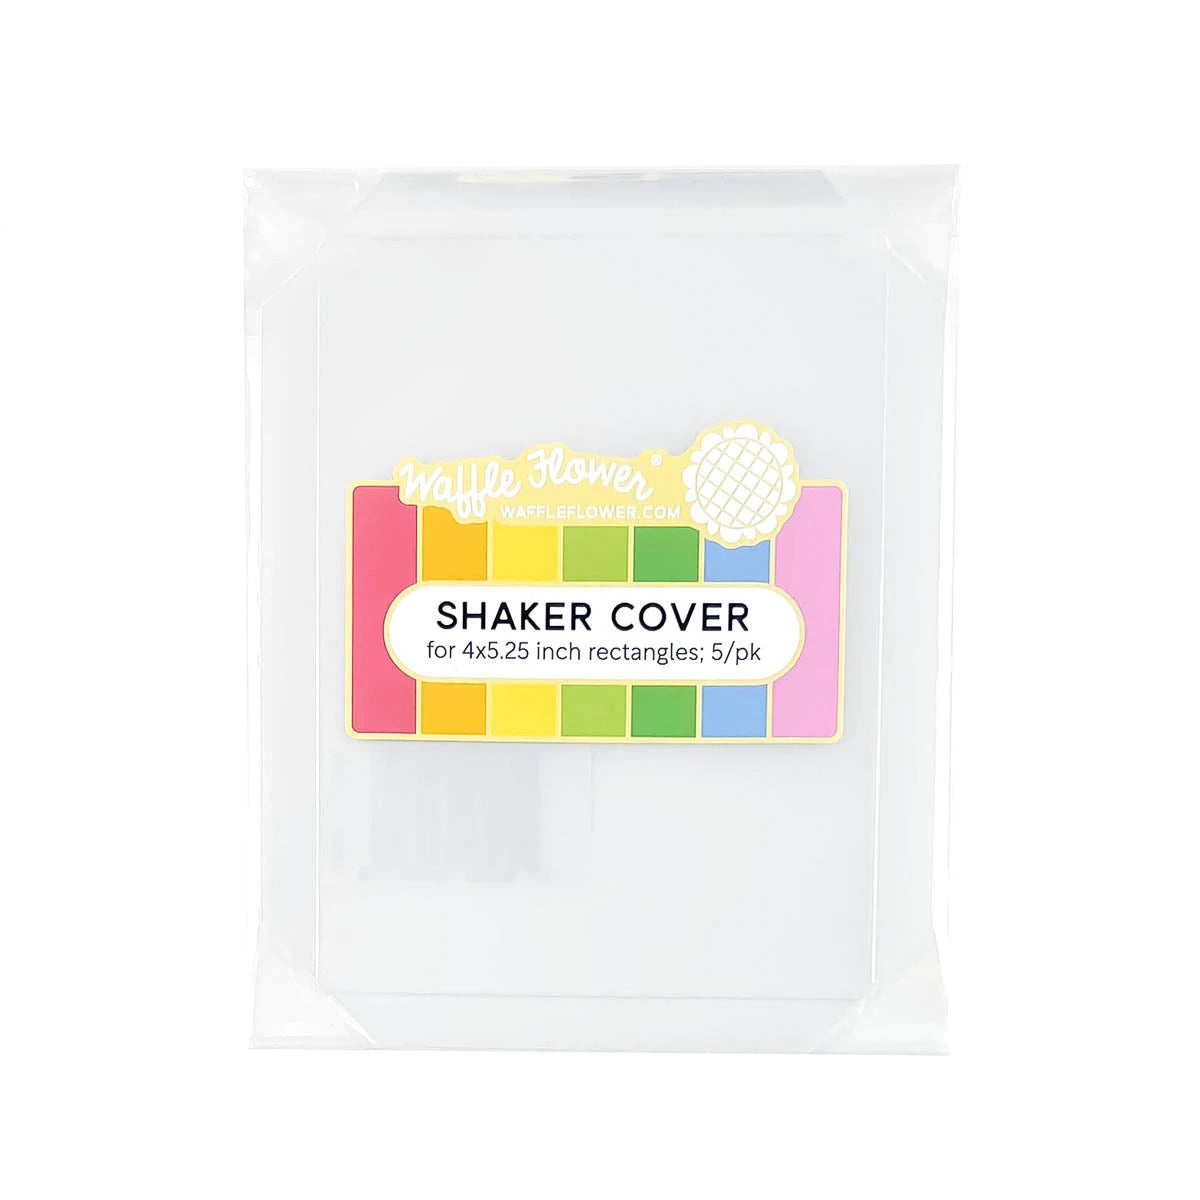 Shaker Cover - 4"x5.25" Flat Rectangle